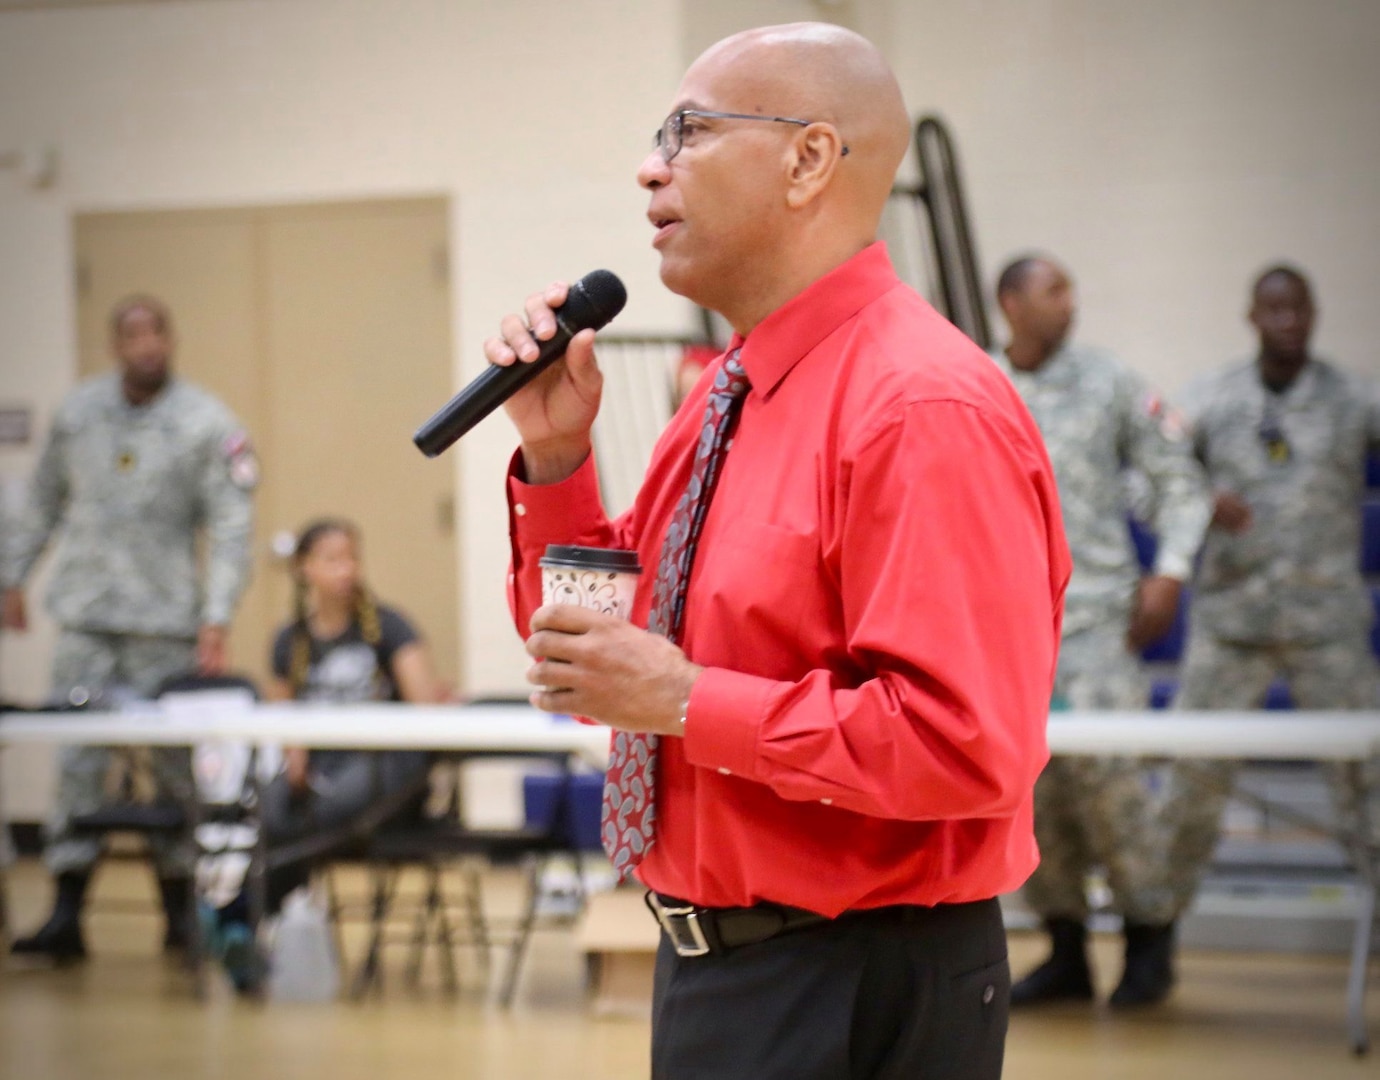 Raynald Blackwell, Capital Guardian Youth ChalleNGe Academy program director, welcomes participants of the newest participants of the CGYCA program July 13. During his briefing, he outlines the military-style program agenda. (U.S. Army National Guard photo by Sgt. 1st Class Ron Lee)